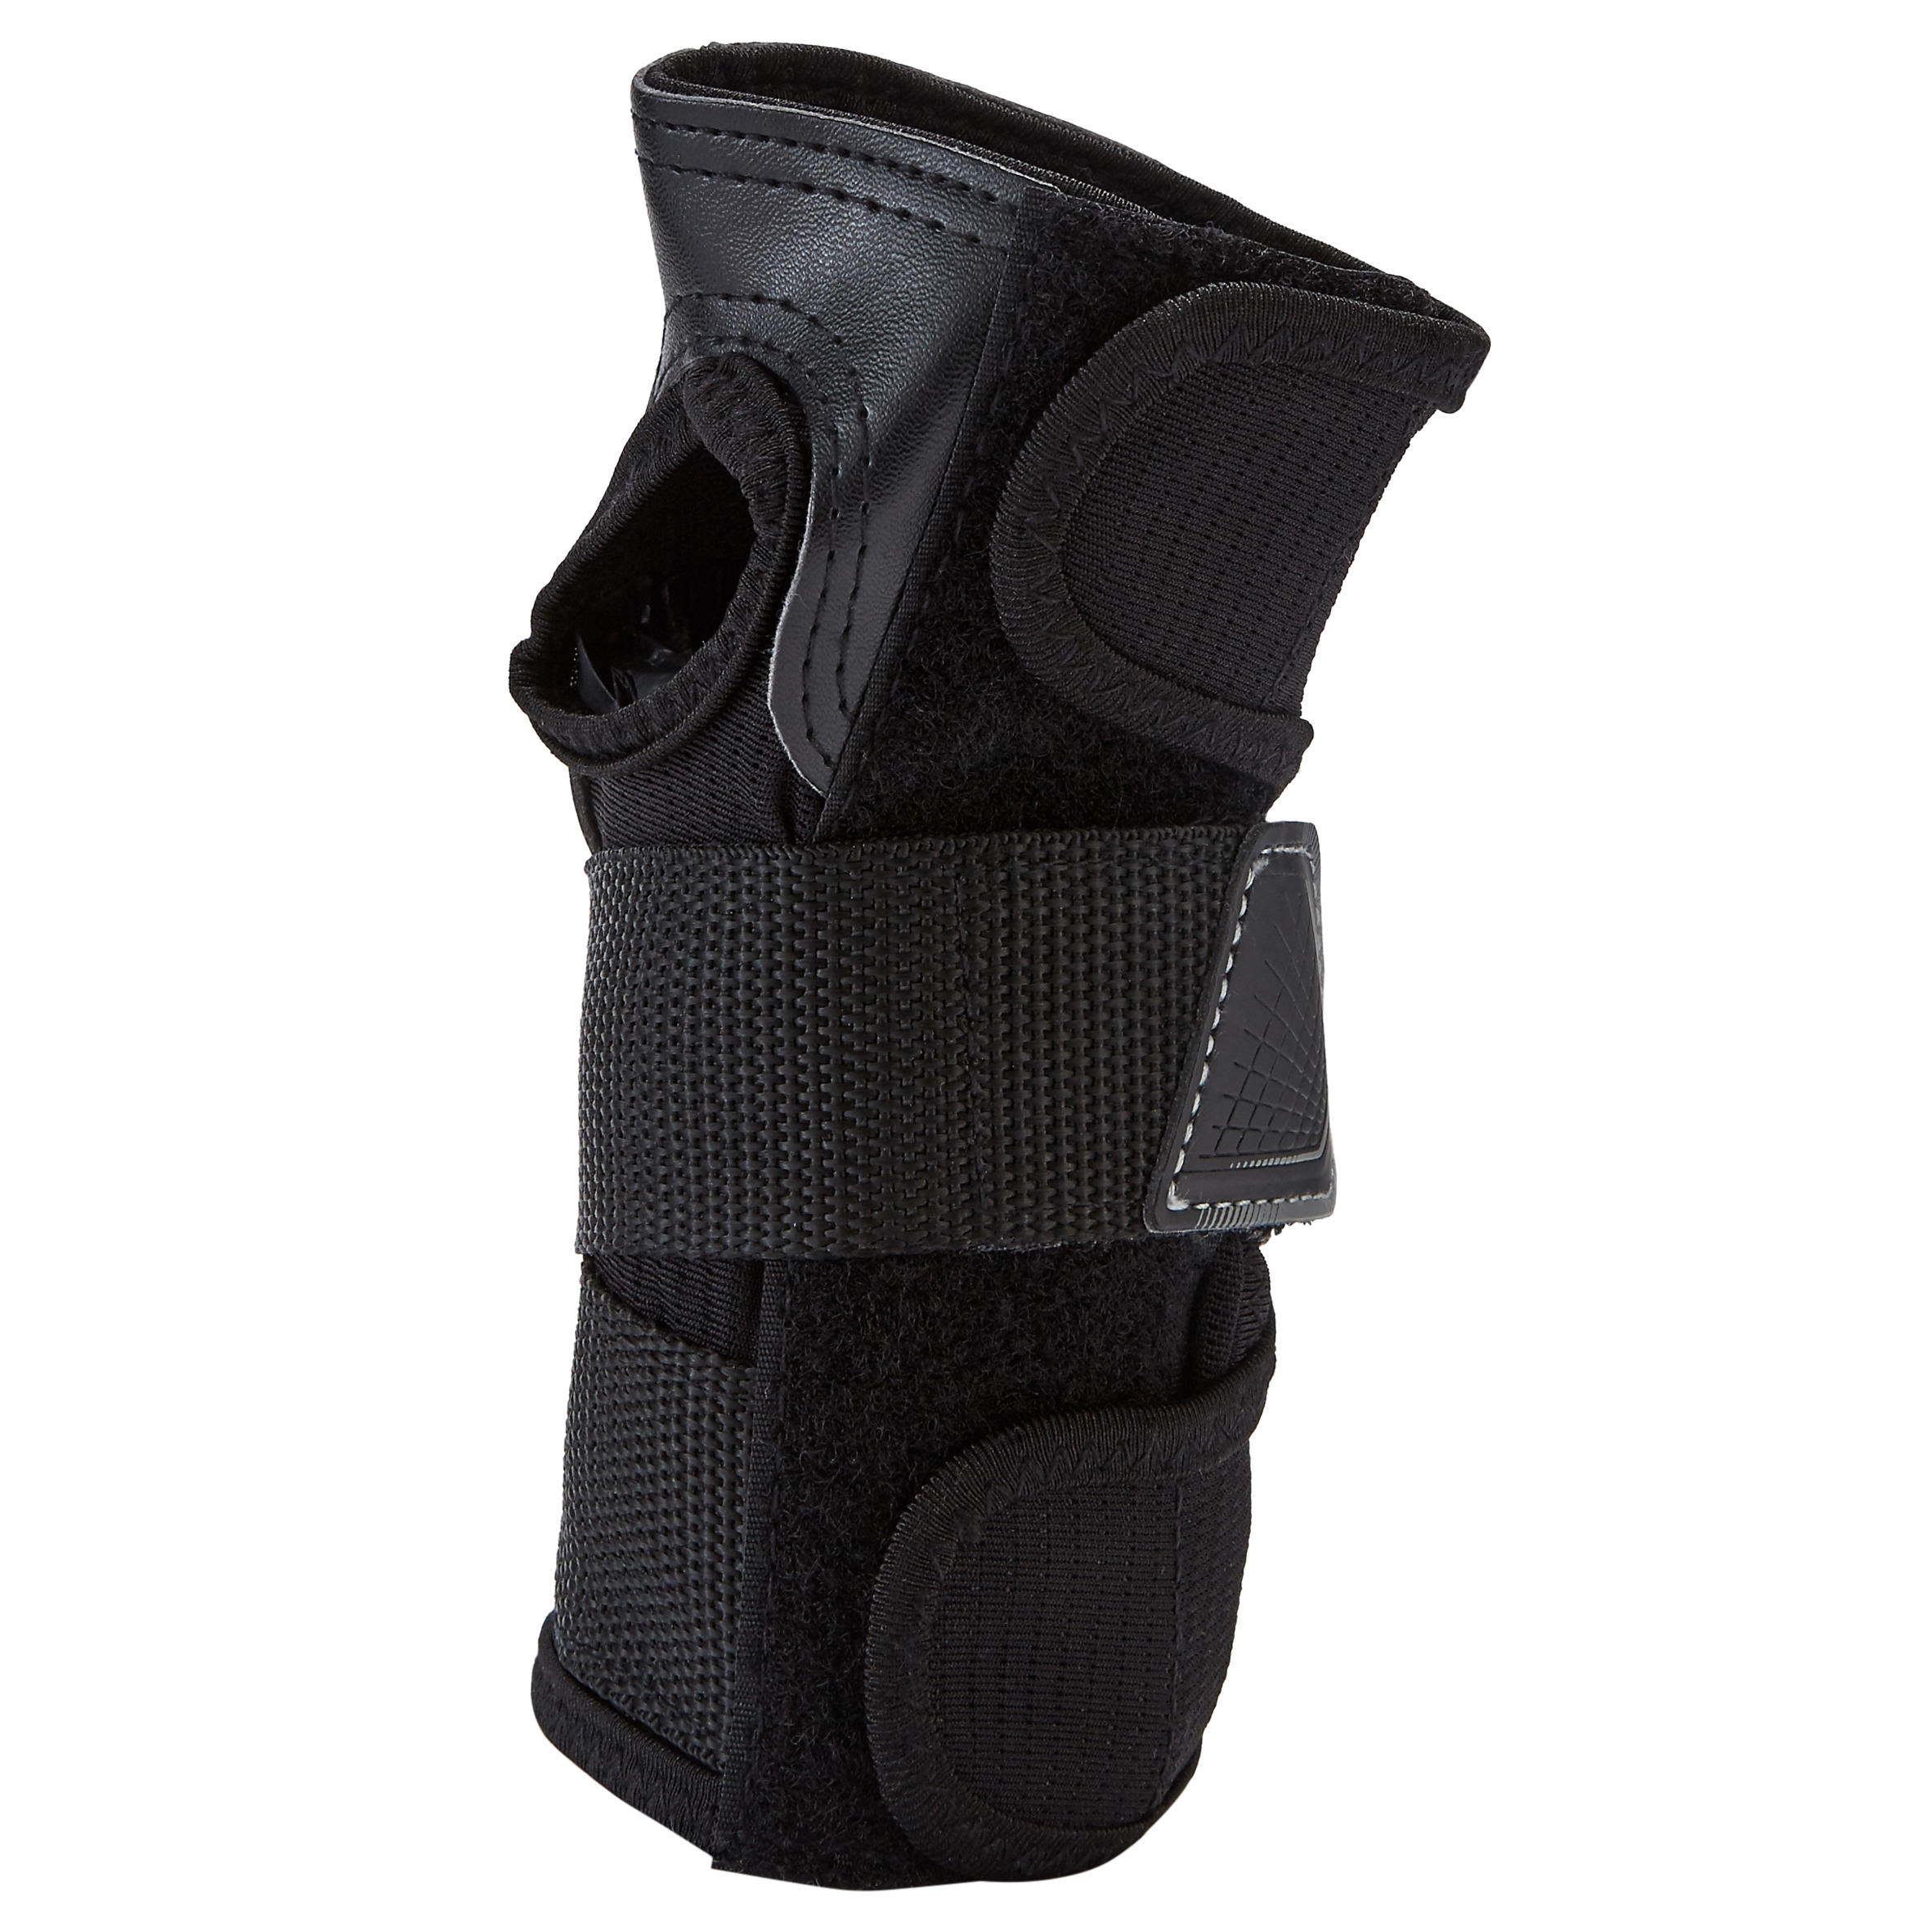 Fit500 Adult Skating Wrist Guards - Black/Grey - OXELO